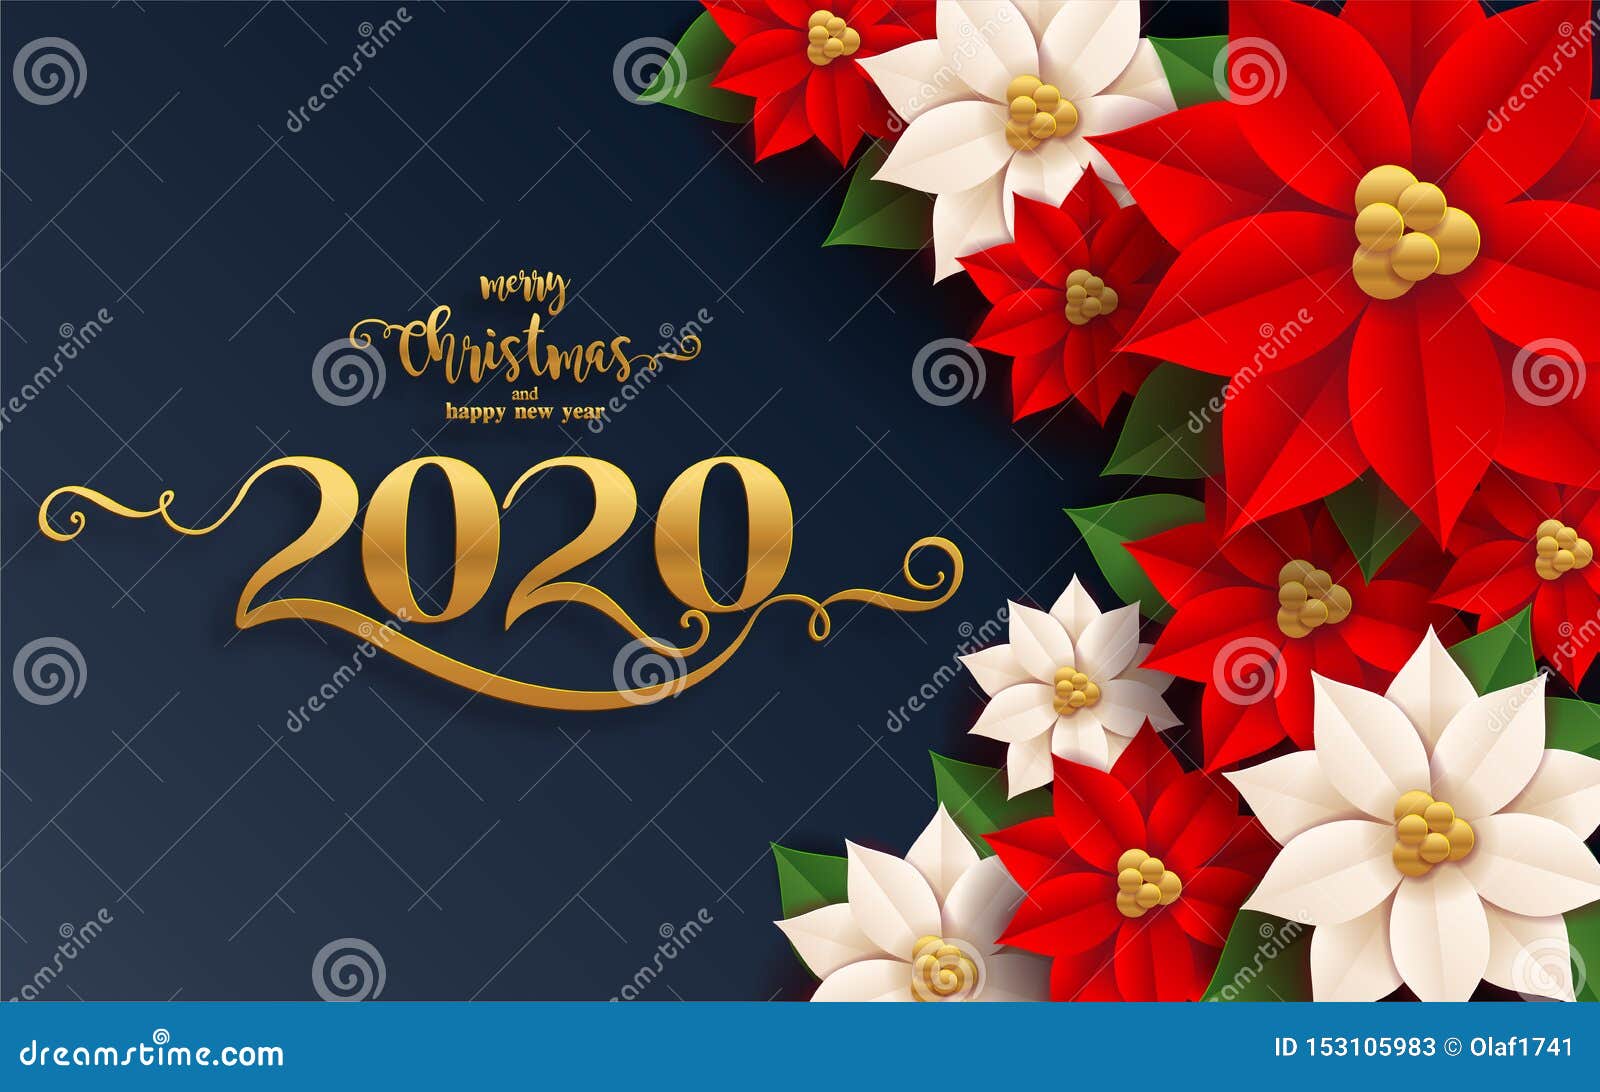 Merry Christmas Greetings and Happy New Year 2020 Stock Vector - Illustration of beautiful